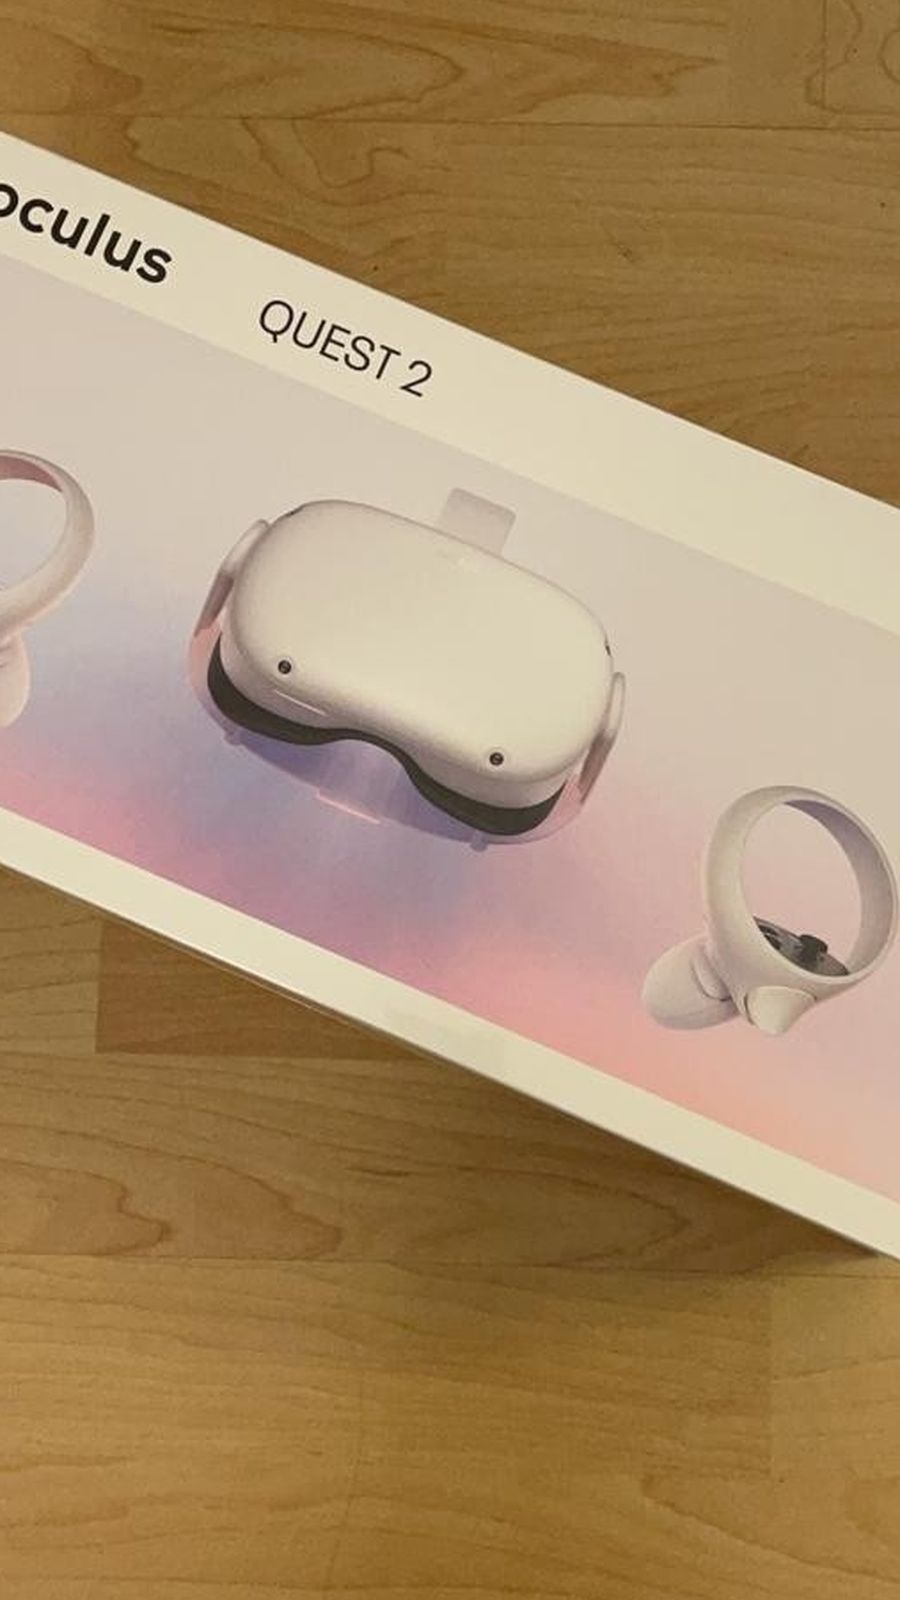 Oculus Quest 2 . Brand New. Sealed In Box.